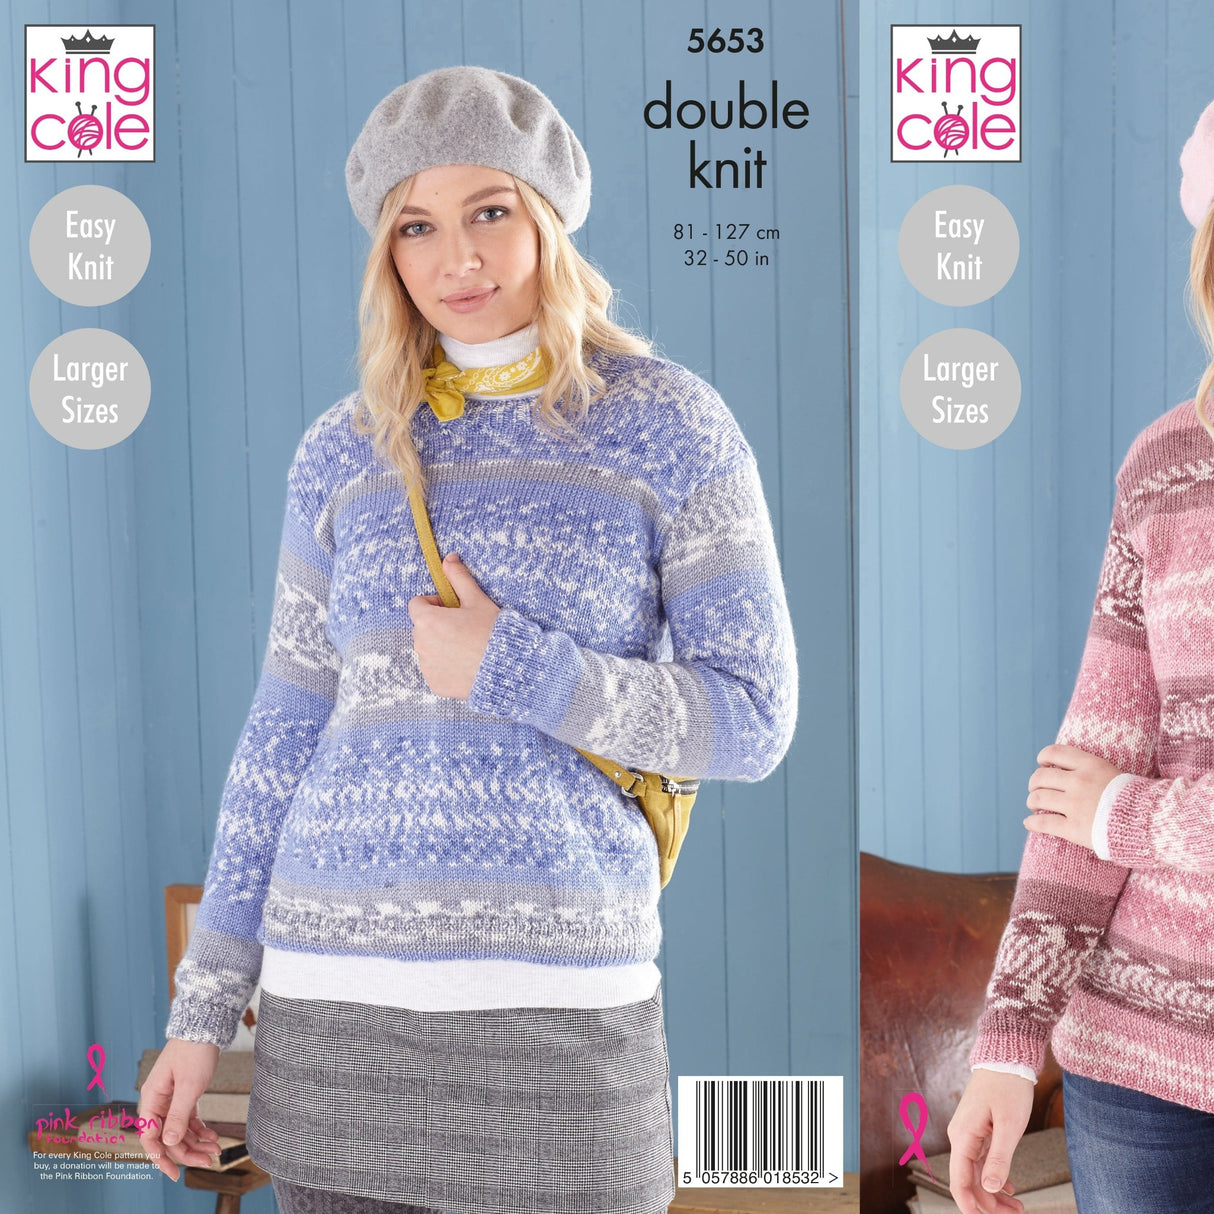 King Cole Patterns King Cole Ladies Sweater and Tunic Knitting Pattern 5653